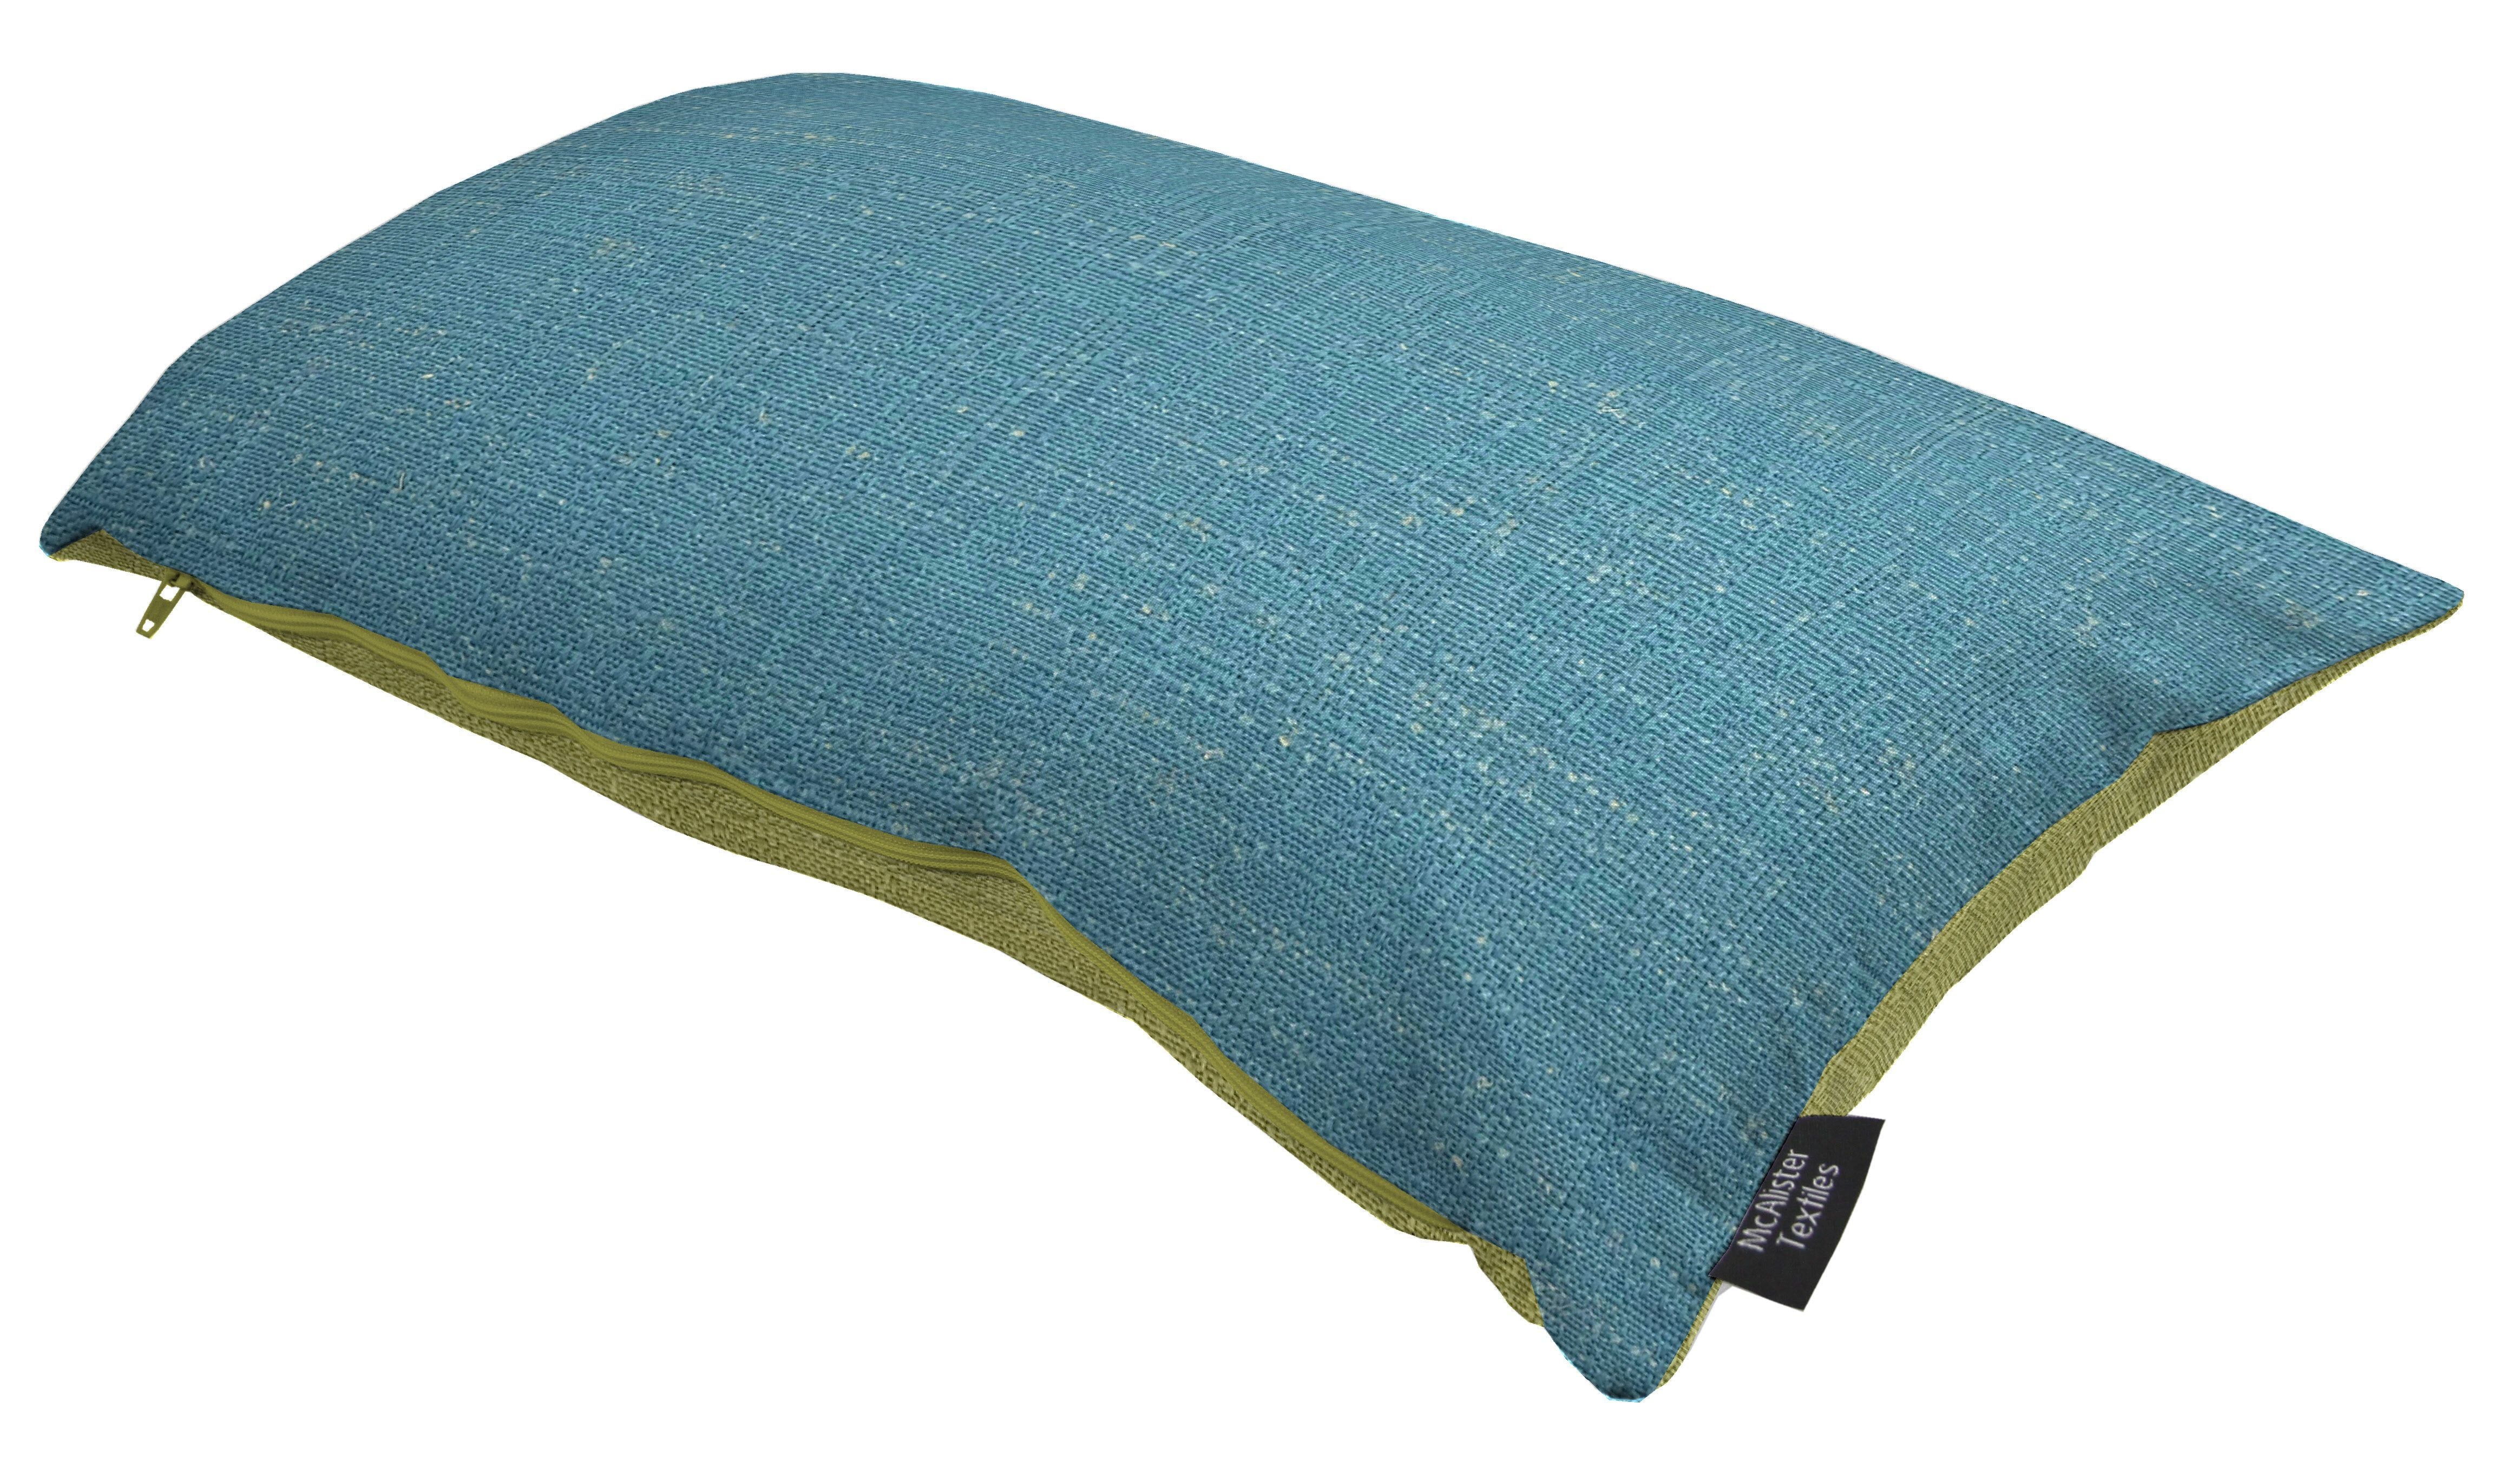 McAlister Textiles Harmony Contrast Teal Plain Cushions Cushions and Covers 